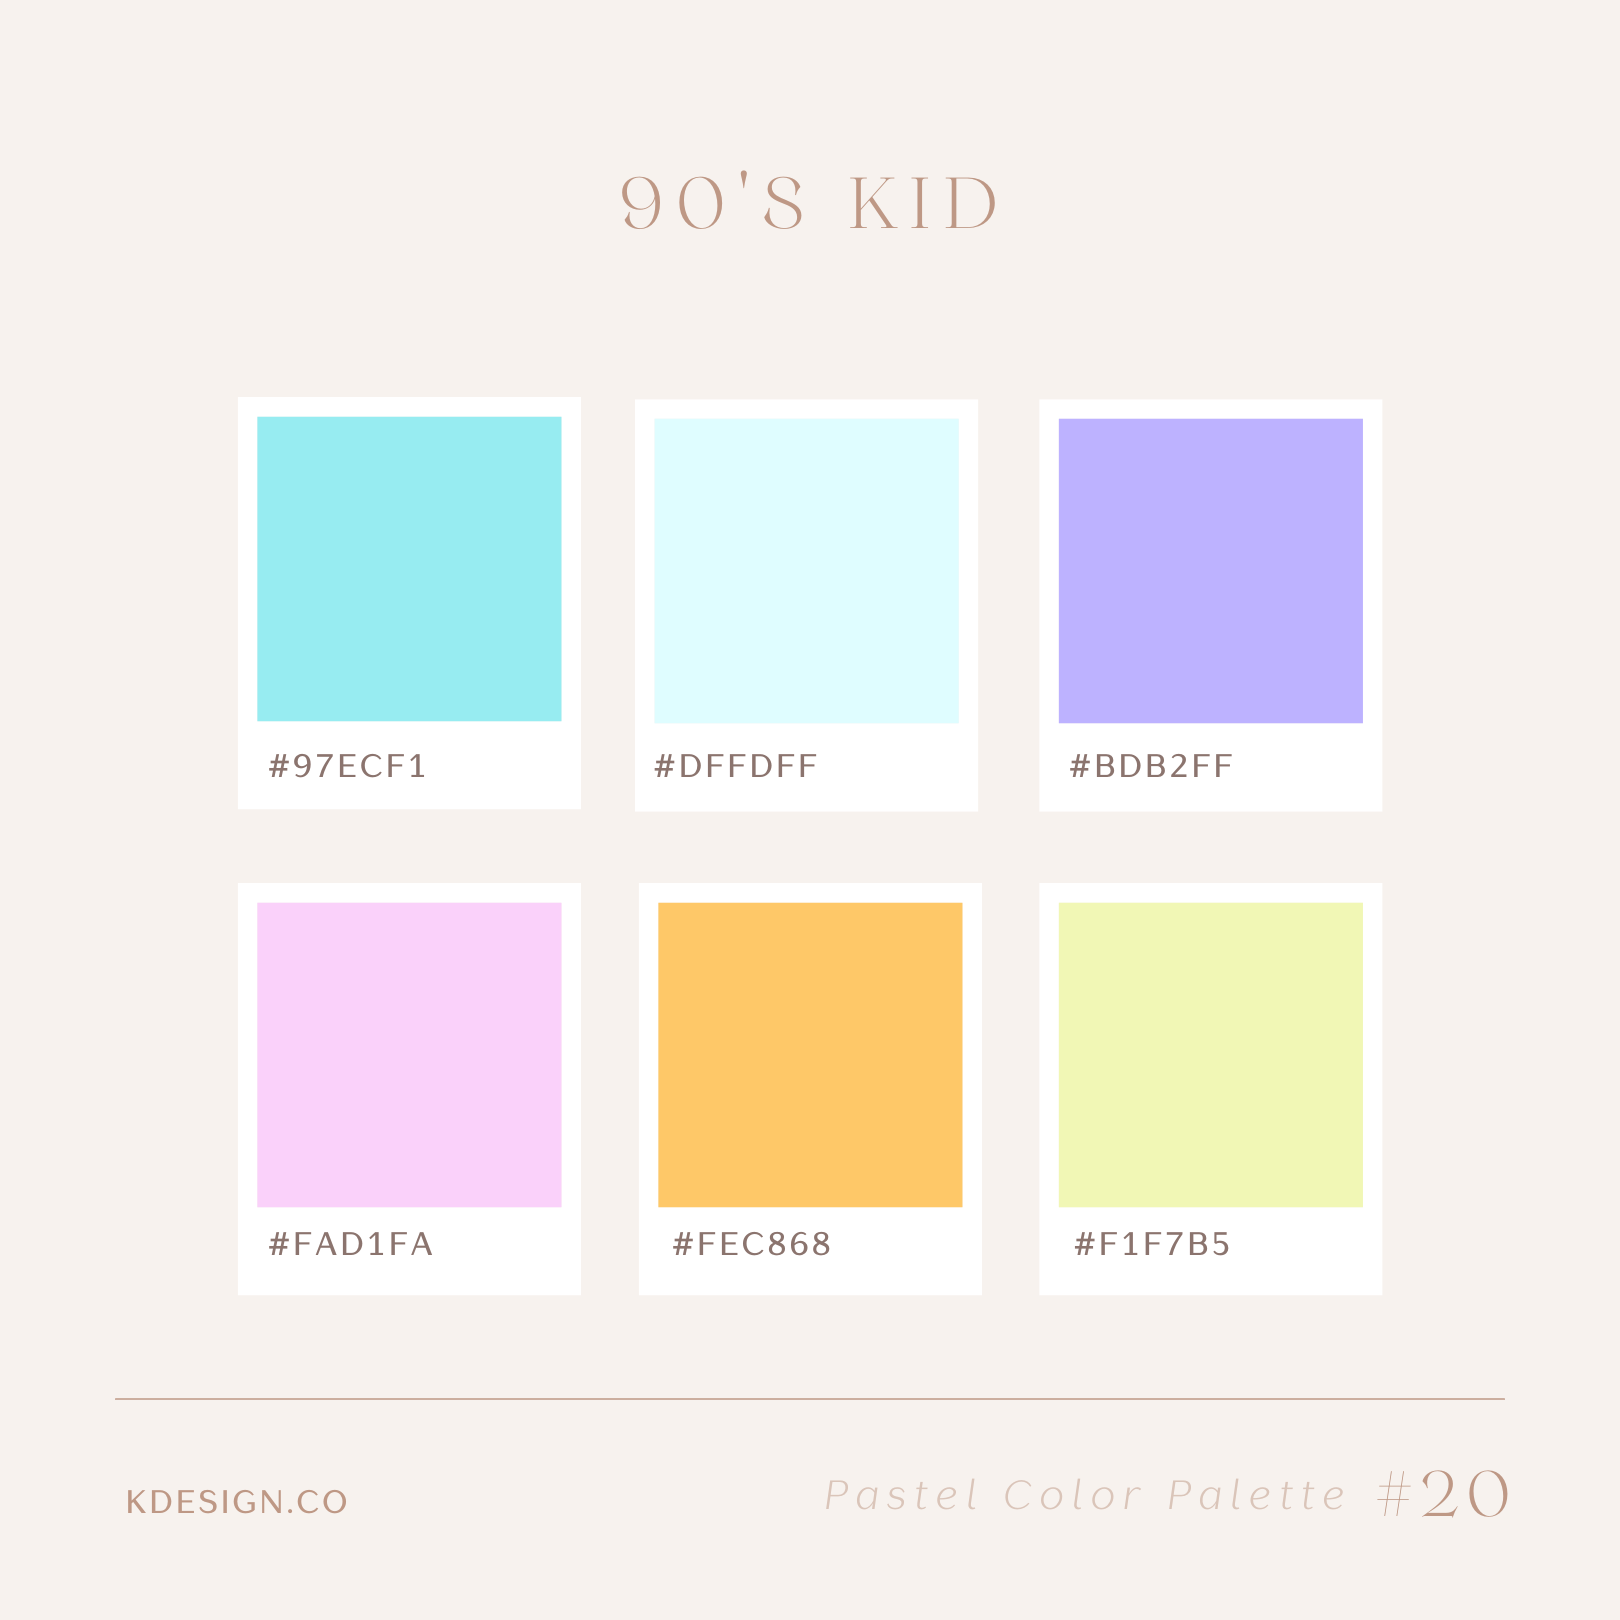 ALL-PASTEL COMBO PACK - SET OF 5 PASTEL COLORS